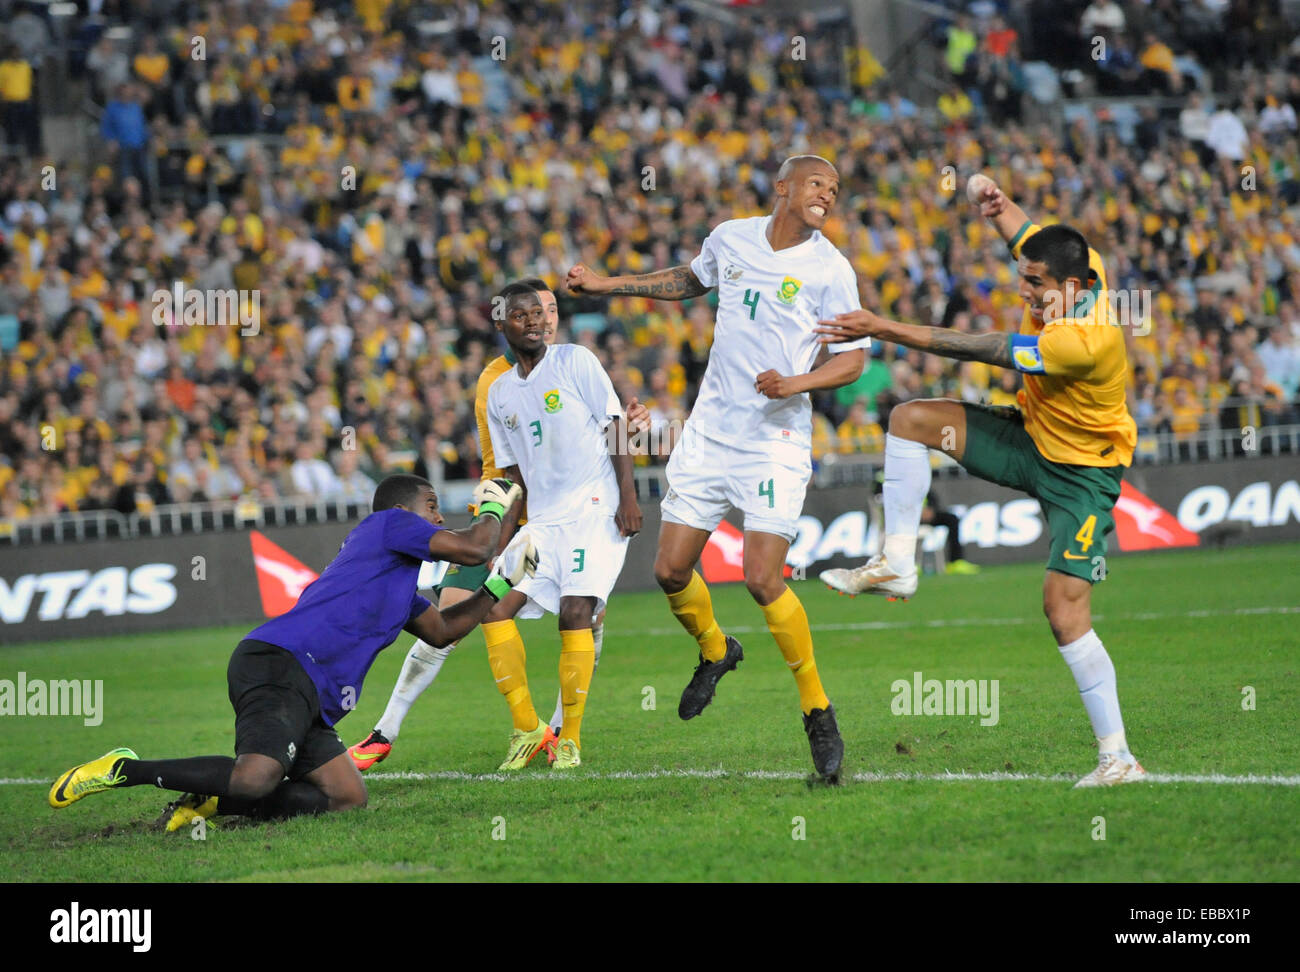 Australia's final game in Australia before the World Cup finals ended in a 1-1 draw against a depleted South African side.  Featuring: Tim Cahill Where: Sydney, Australia When: 26 May 2014 Stock Photo